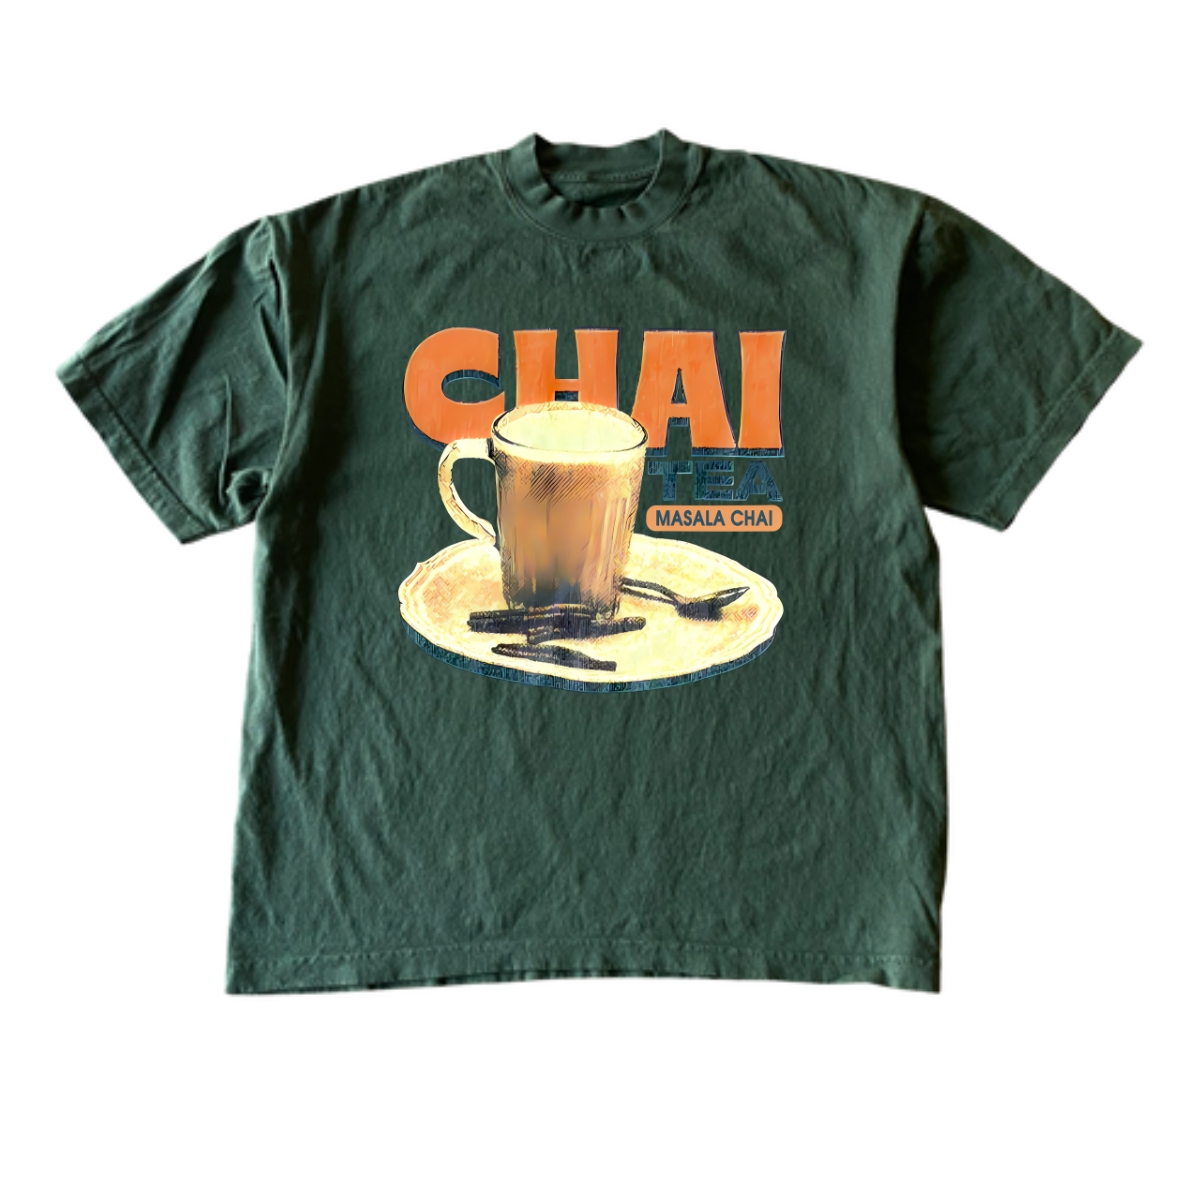 Chai Tea Tee Shirt Outfit, Gift for Men, Women And Young N100